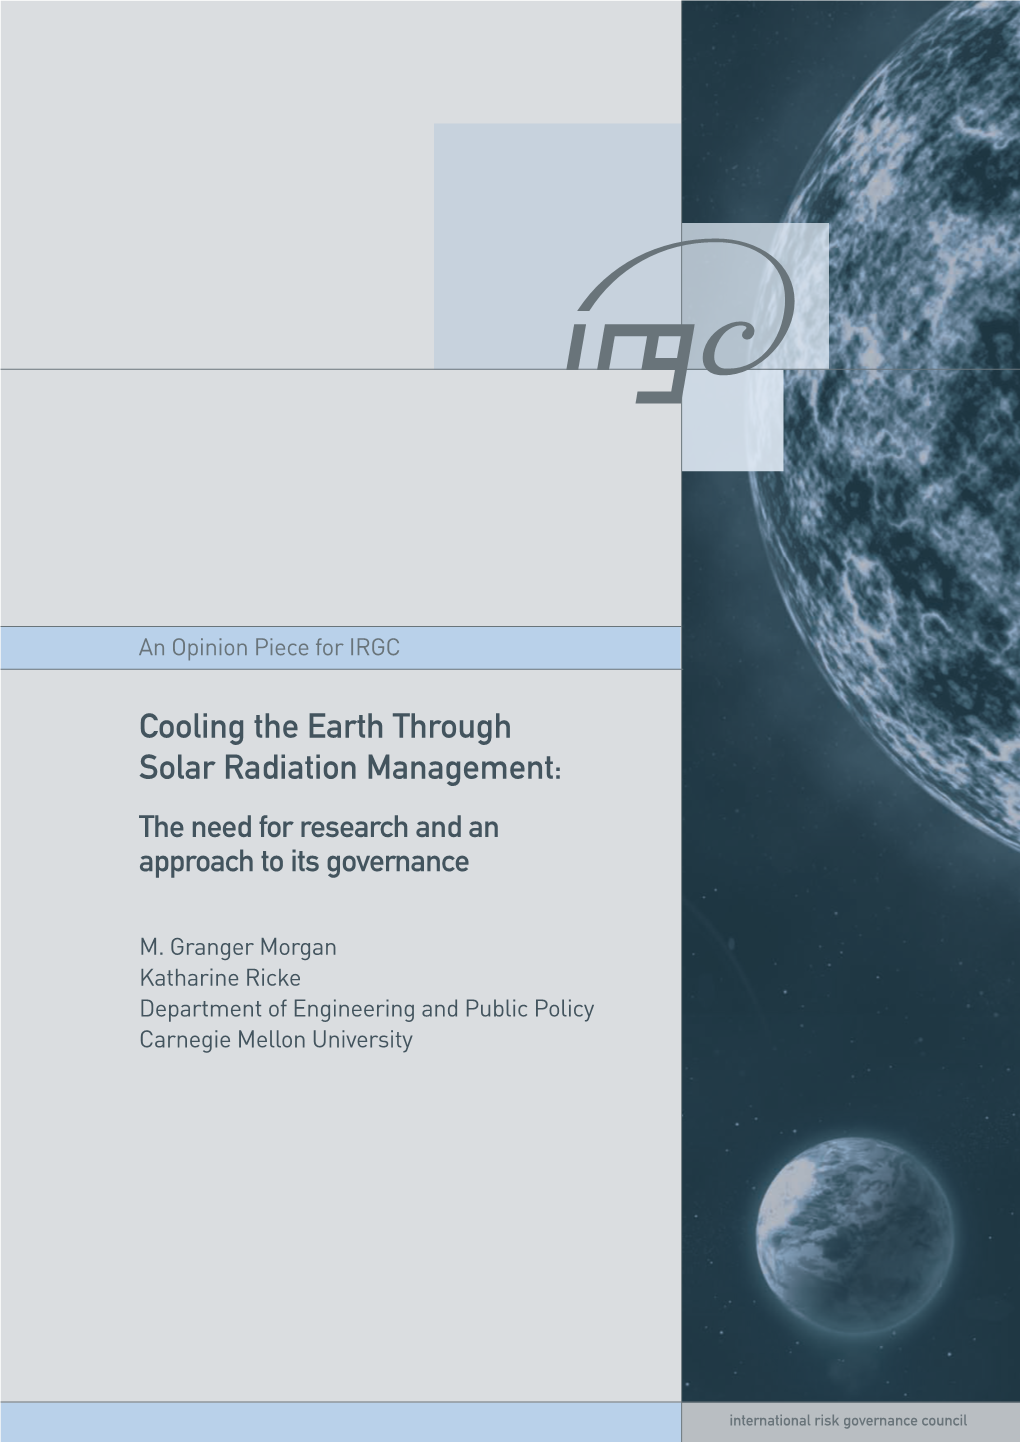 Cooling the Earth Through Solar Radiation Management: the Need for Research and an Approach to Its Governance